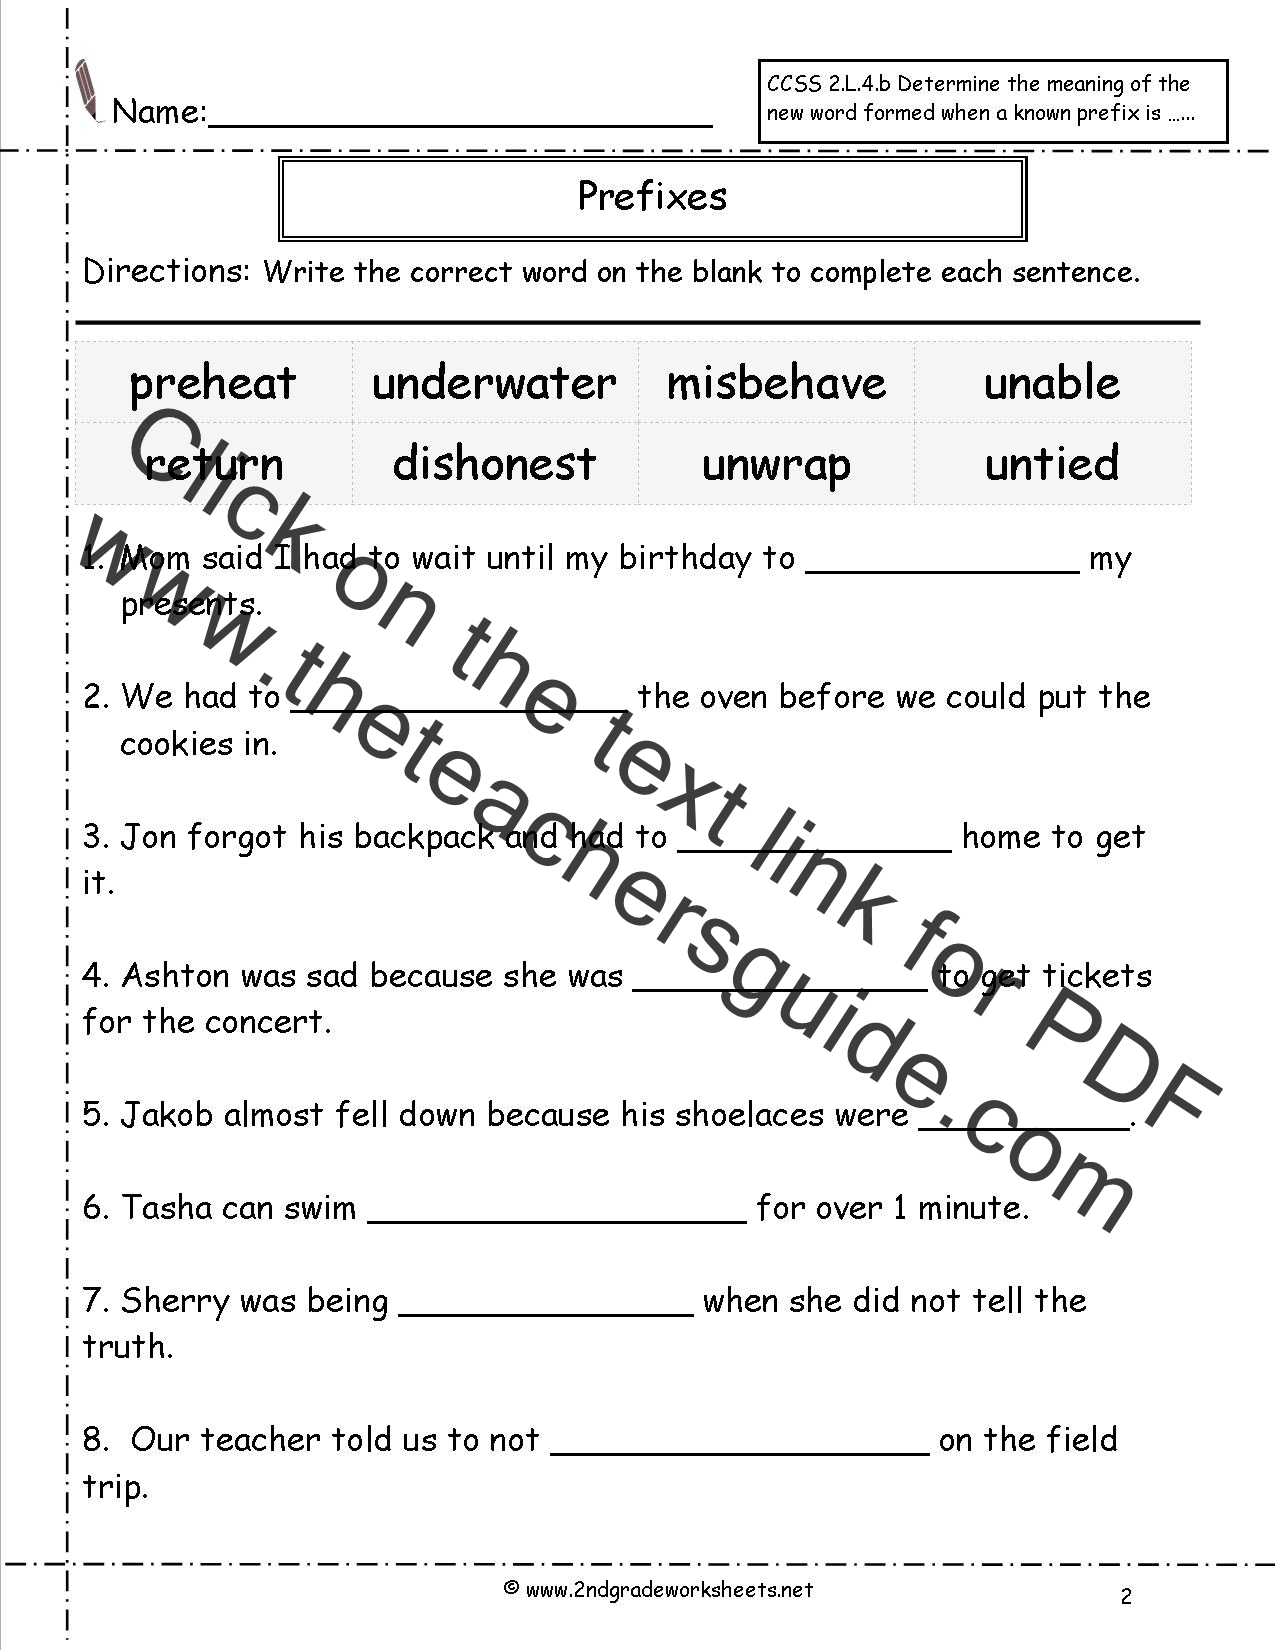 Second Grade Prefixes Worksheets Throughout Prefixes Worksheet 2nd Grade